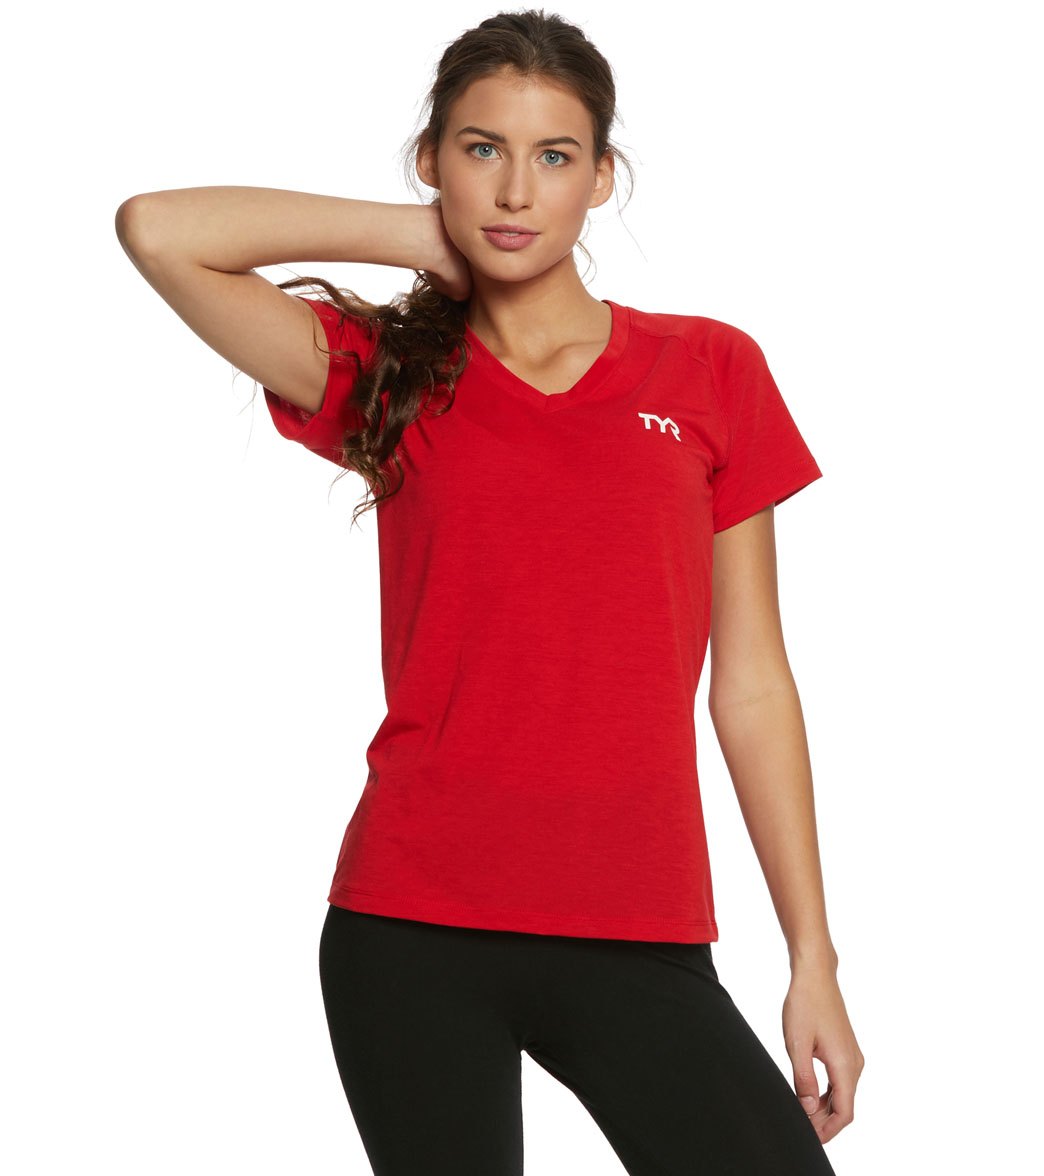 TYR Women's Alliance Tech Tee Shirt - Red Large Polyester/Spandex - Swimoutlet.com